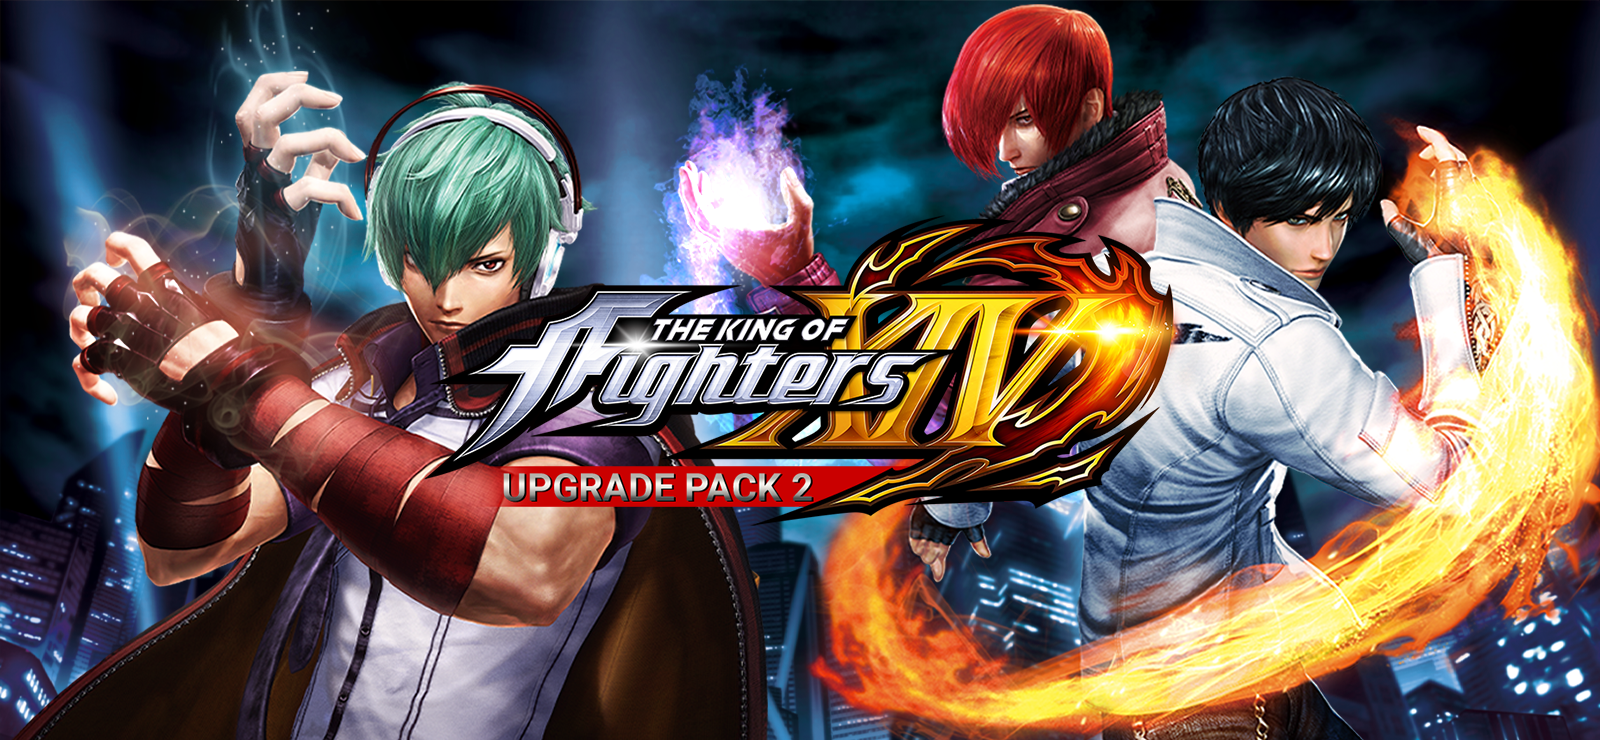 THE KING OF FIGHTERS XIV GALAXY EDITION UPGRADE PACK 2